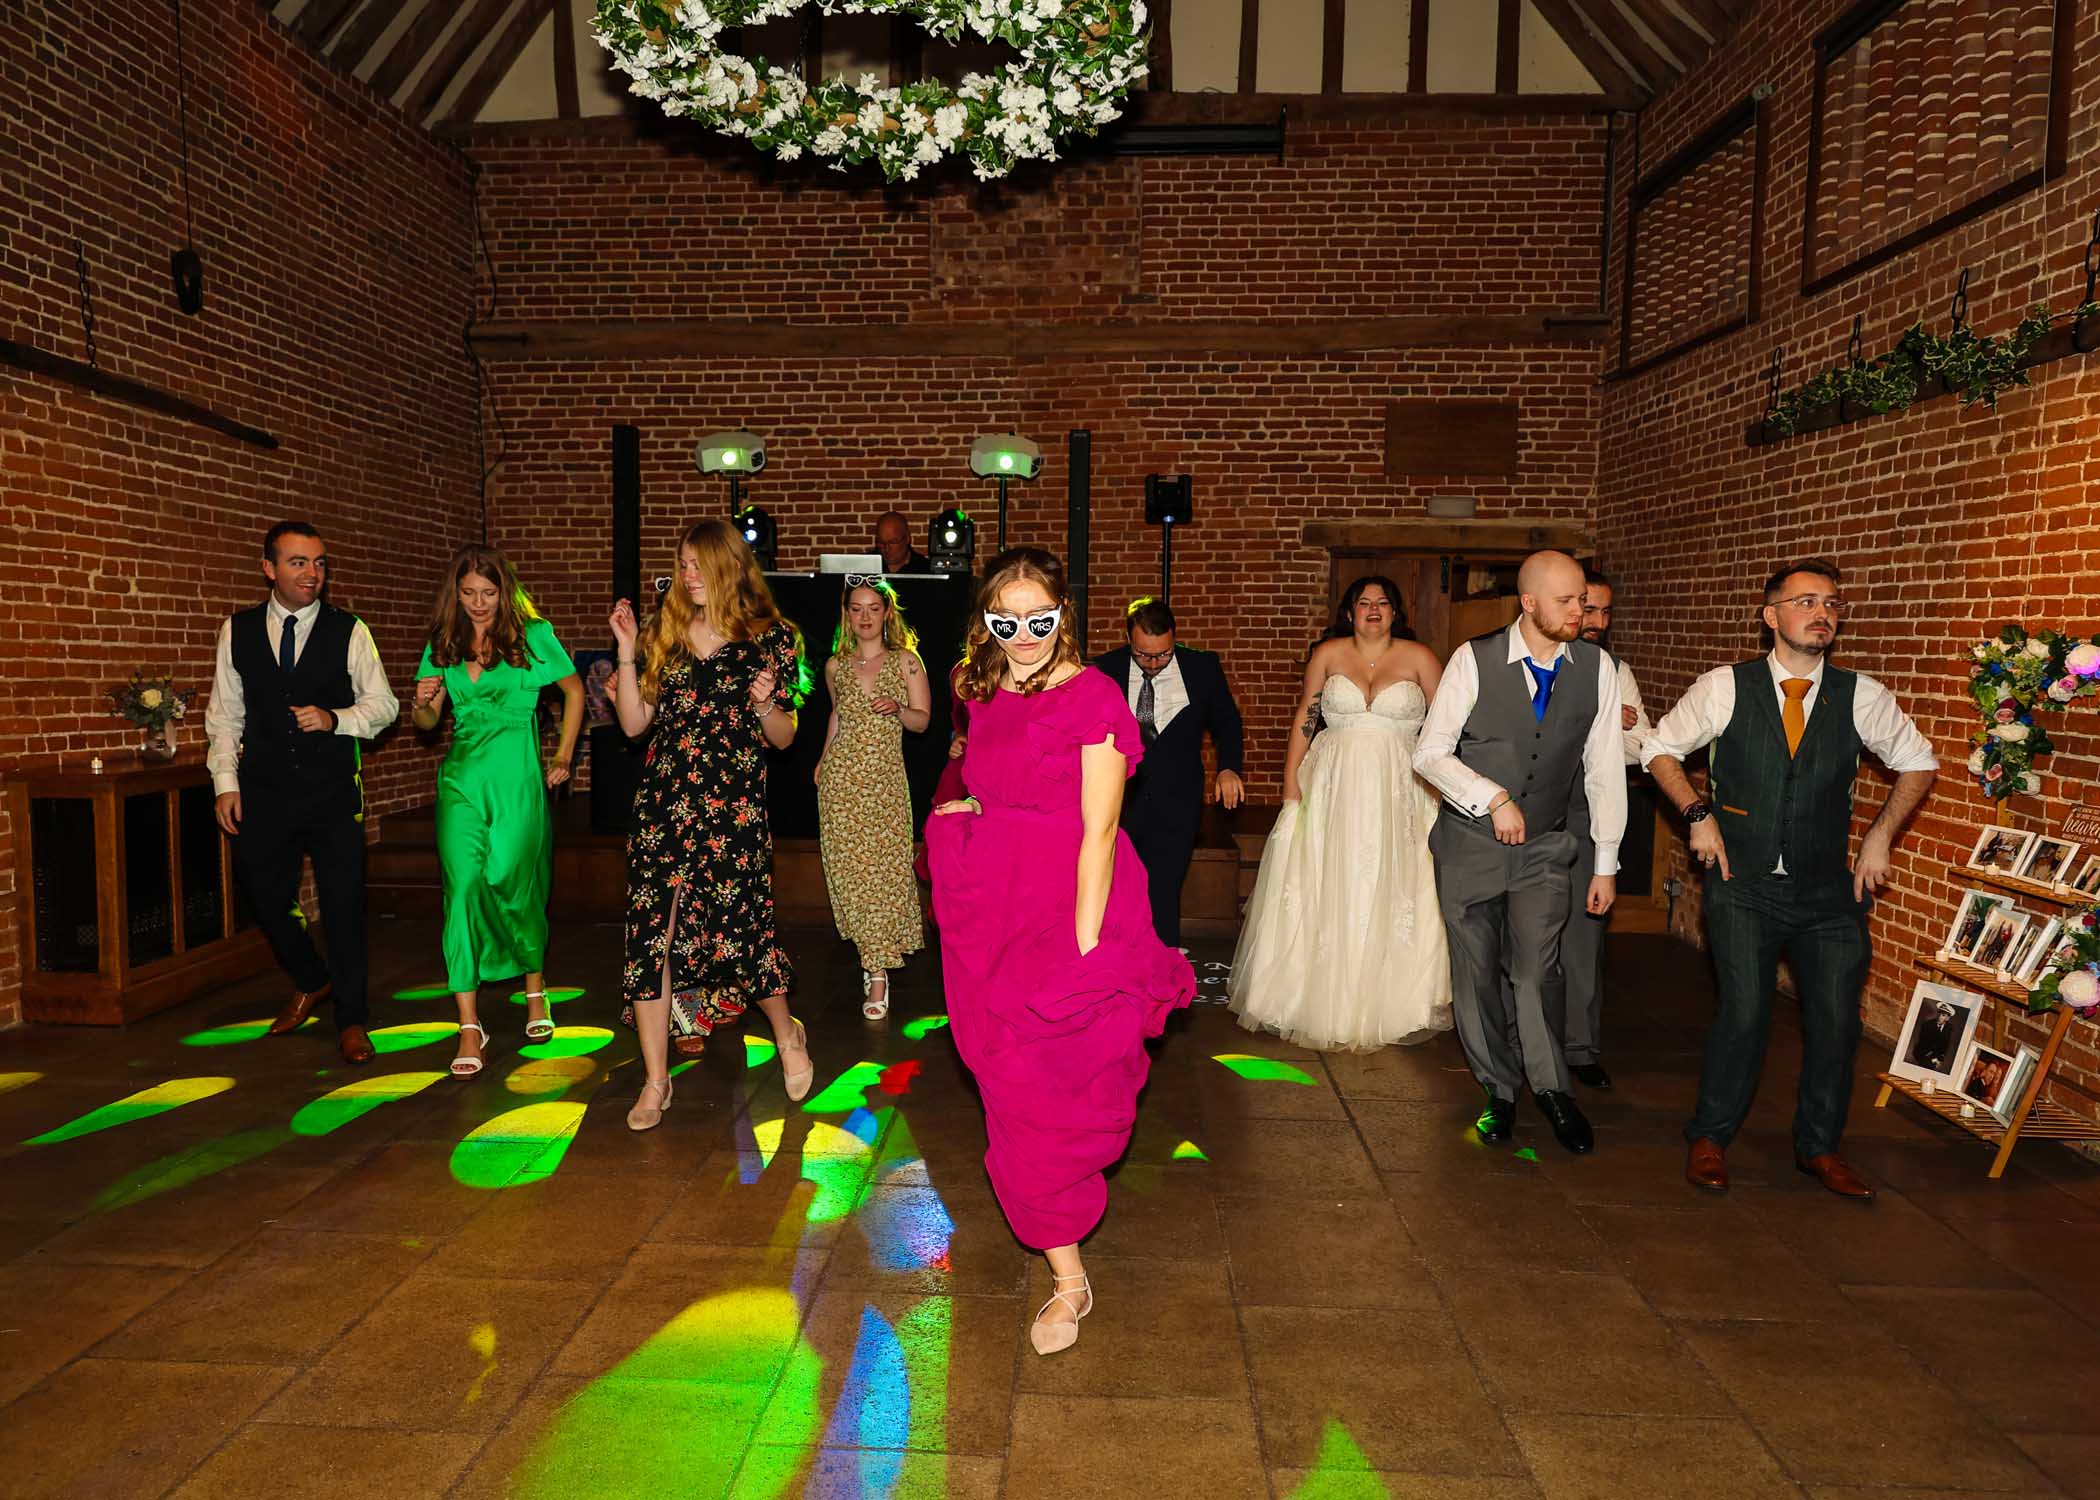 A bridal party dancing at a wedding at Haughley Park Barn taken by Suffolk Wedding Photographer Hayley Denston Photography